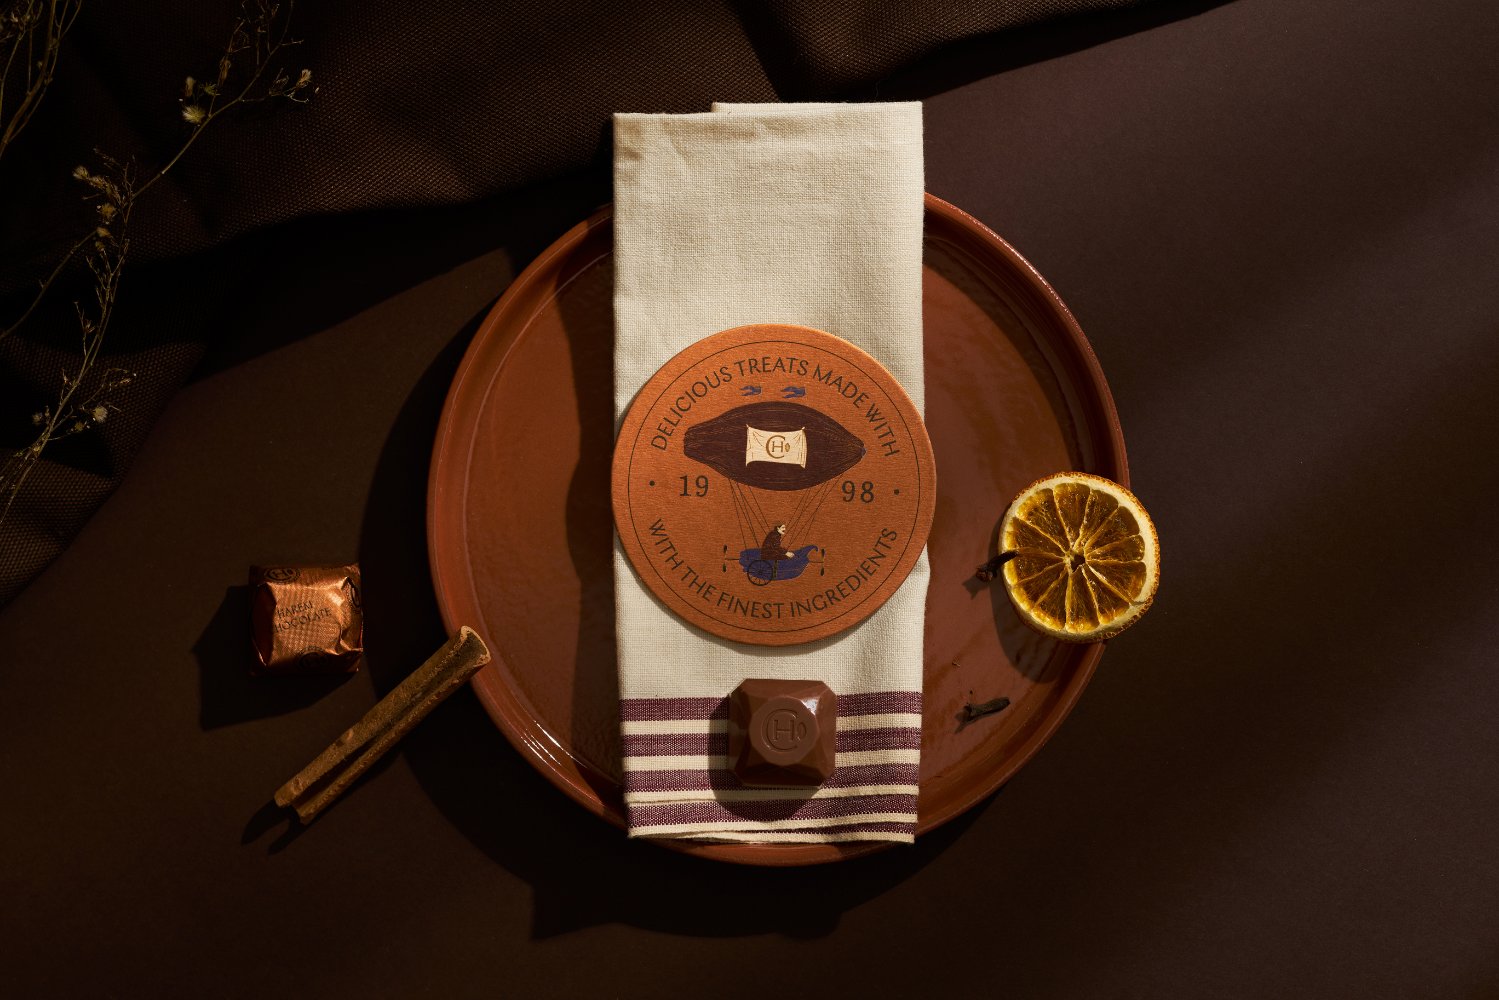 Harem Chocolate Brings the Iconic Turkish Aesthetic Into the 21st Century